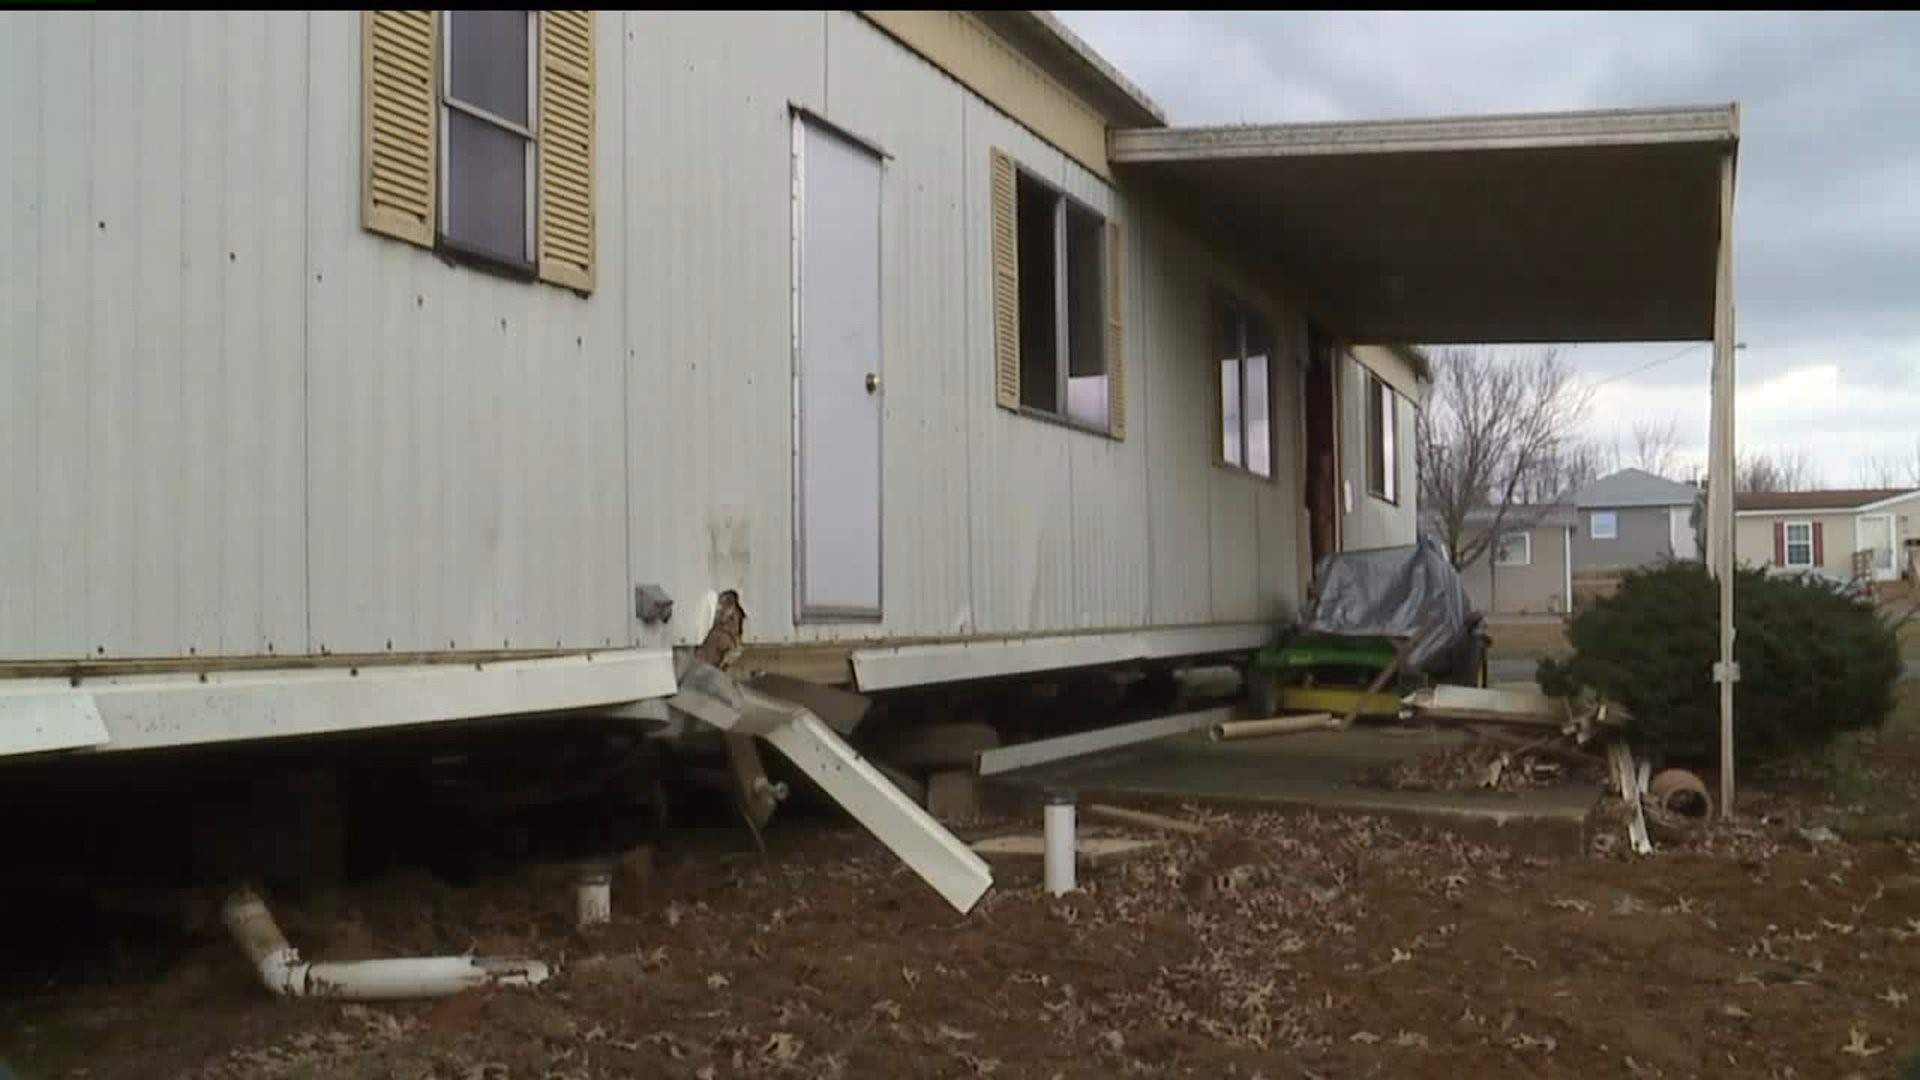 Mobile home park dealing with flooding aftermath months later